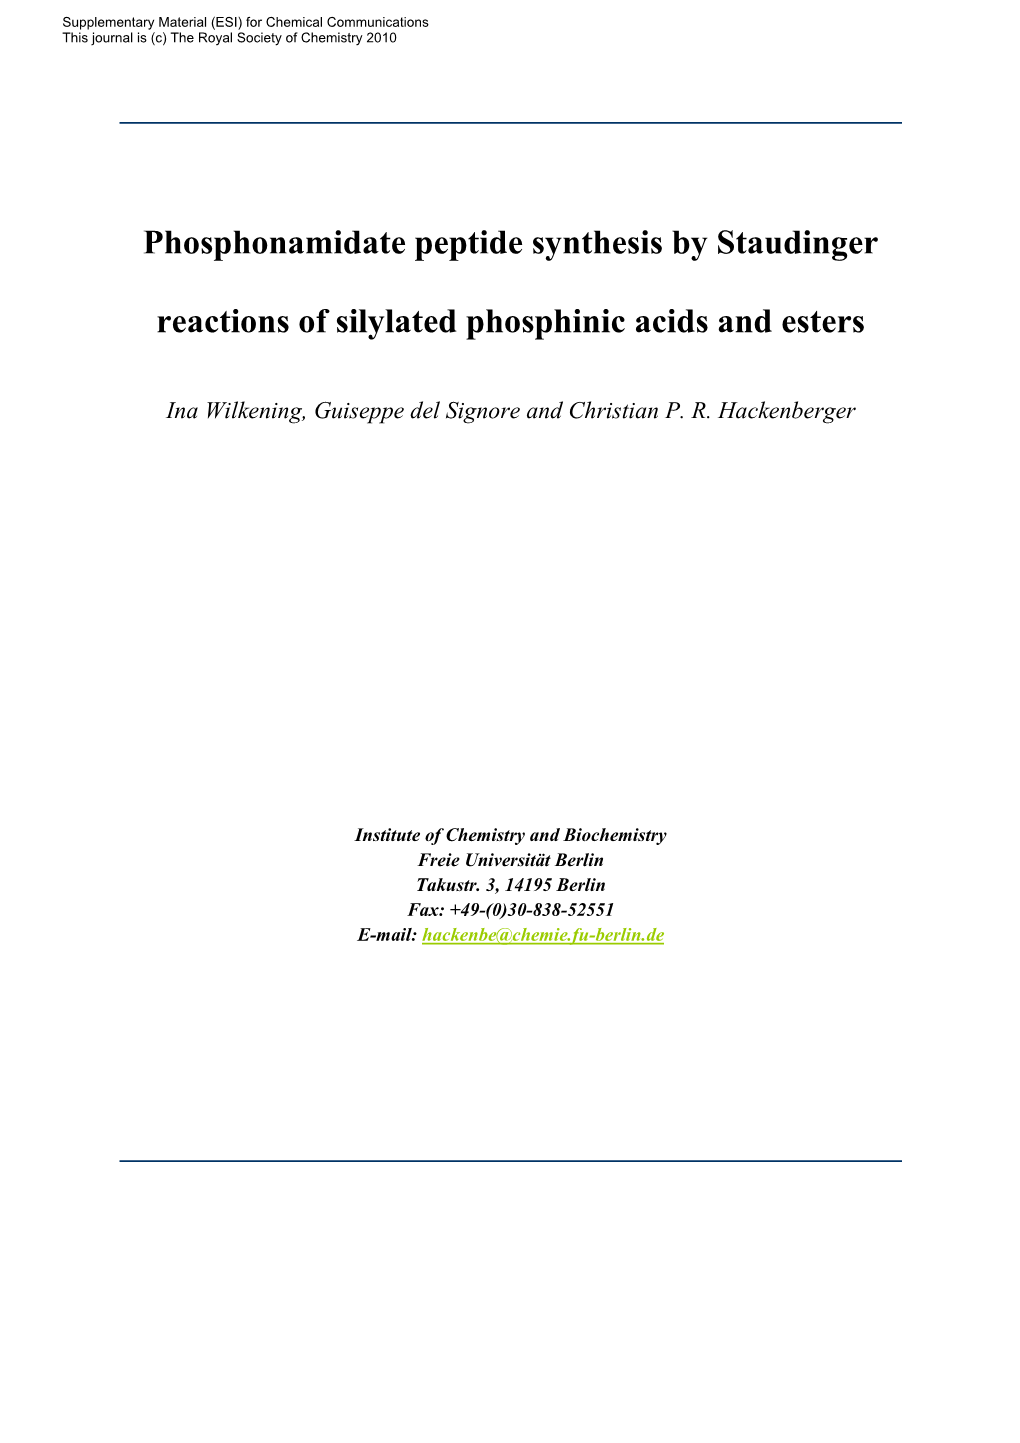 Phosphonamidate Peptide Synthesis by Staudinger Reactions of Silylated Phosphinic Acids Supporting Information